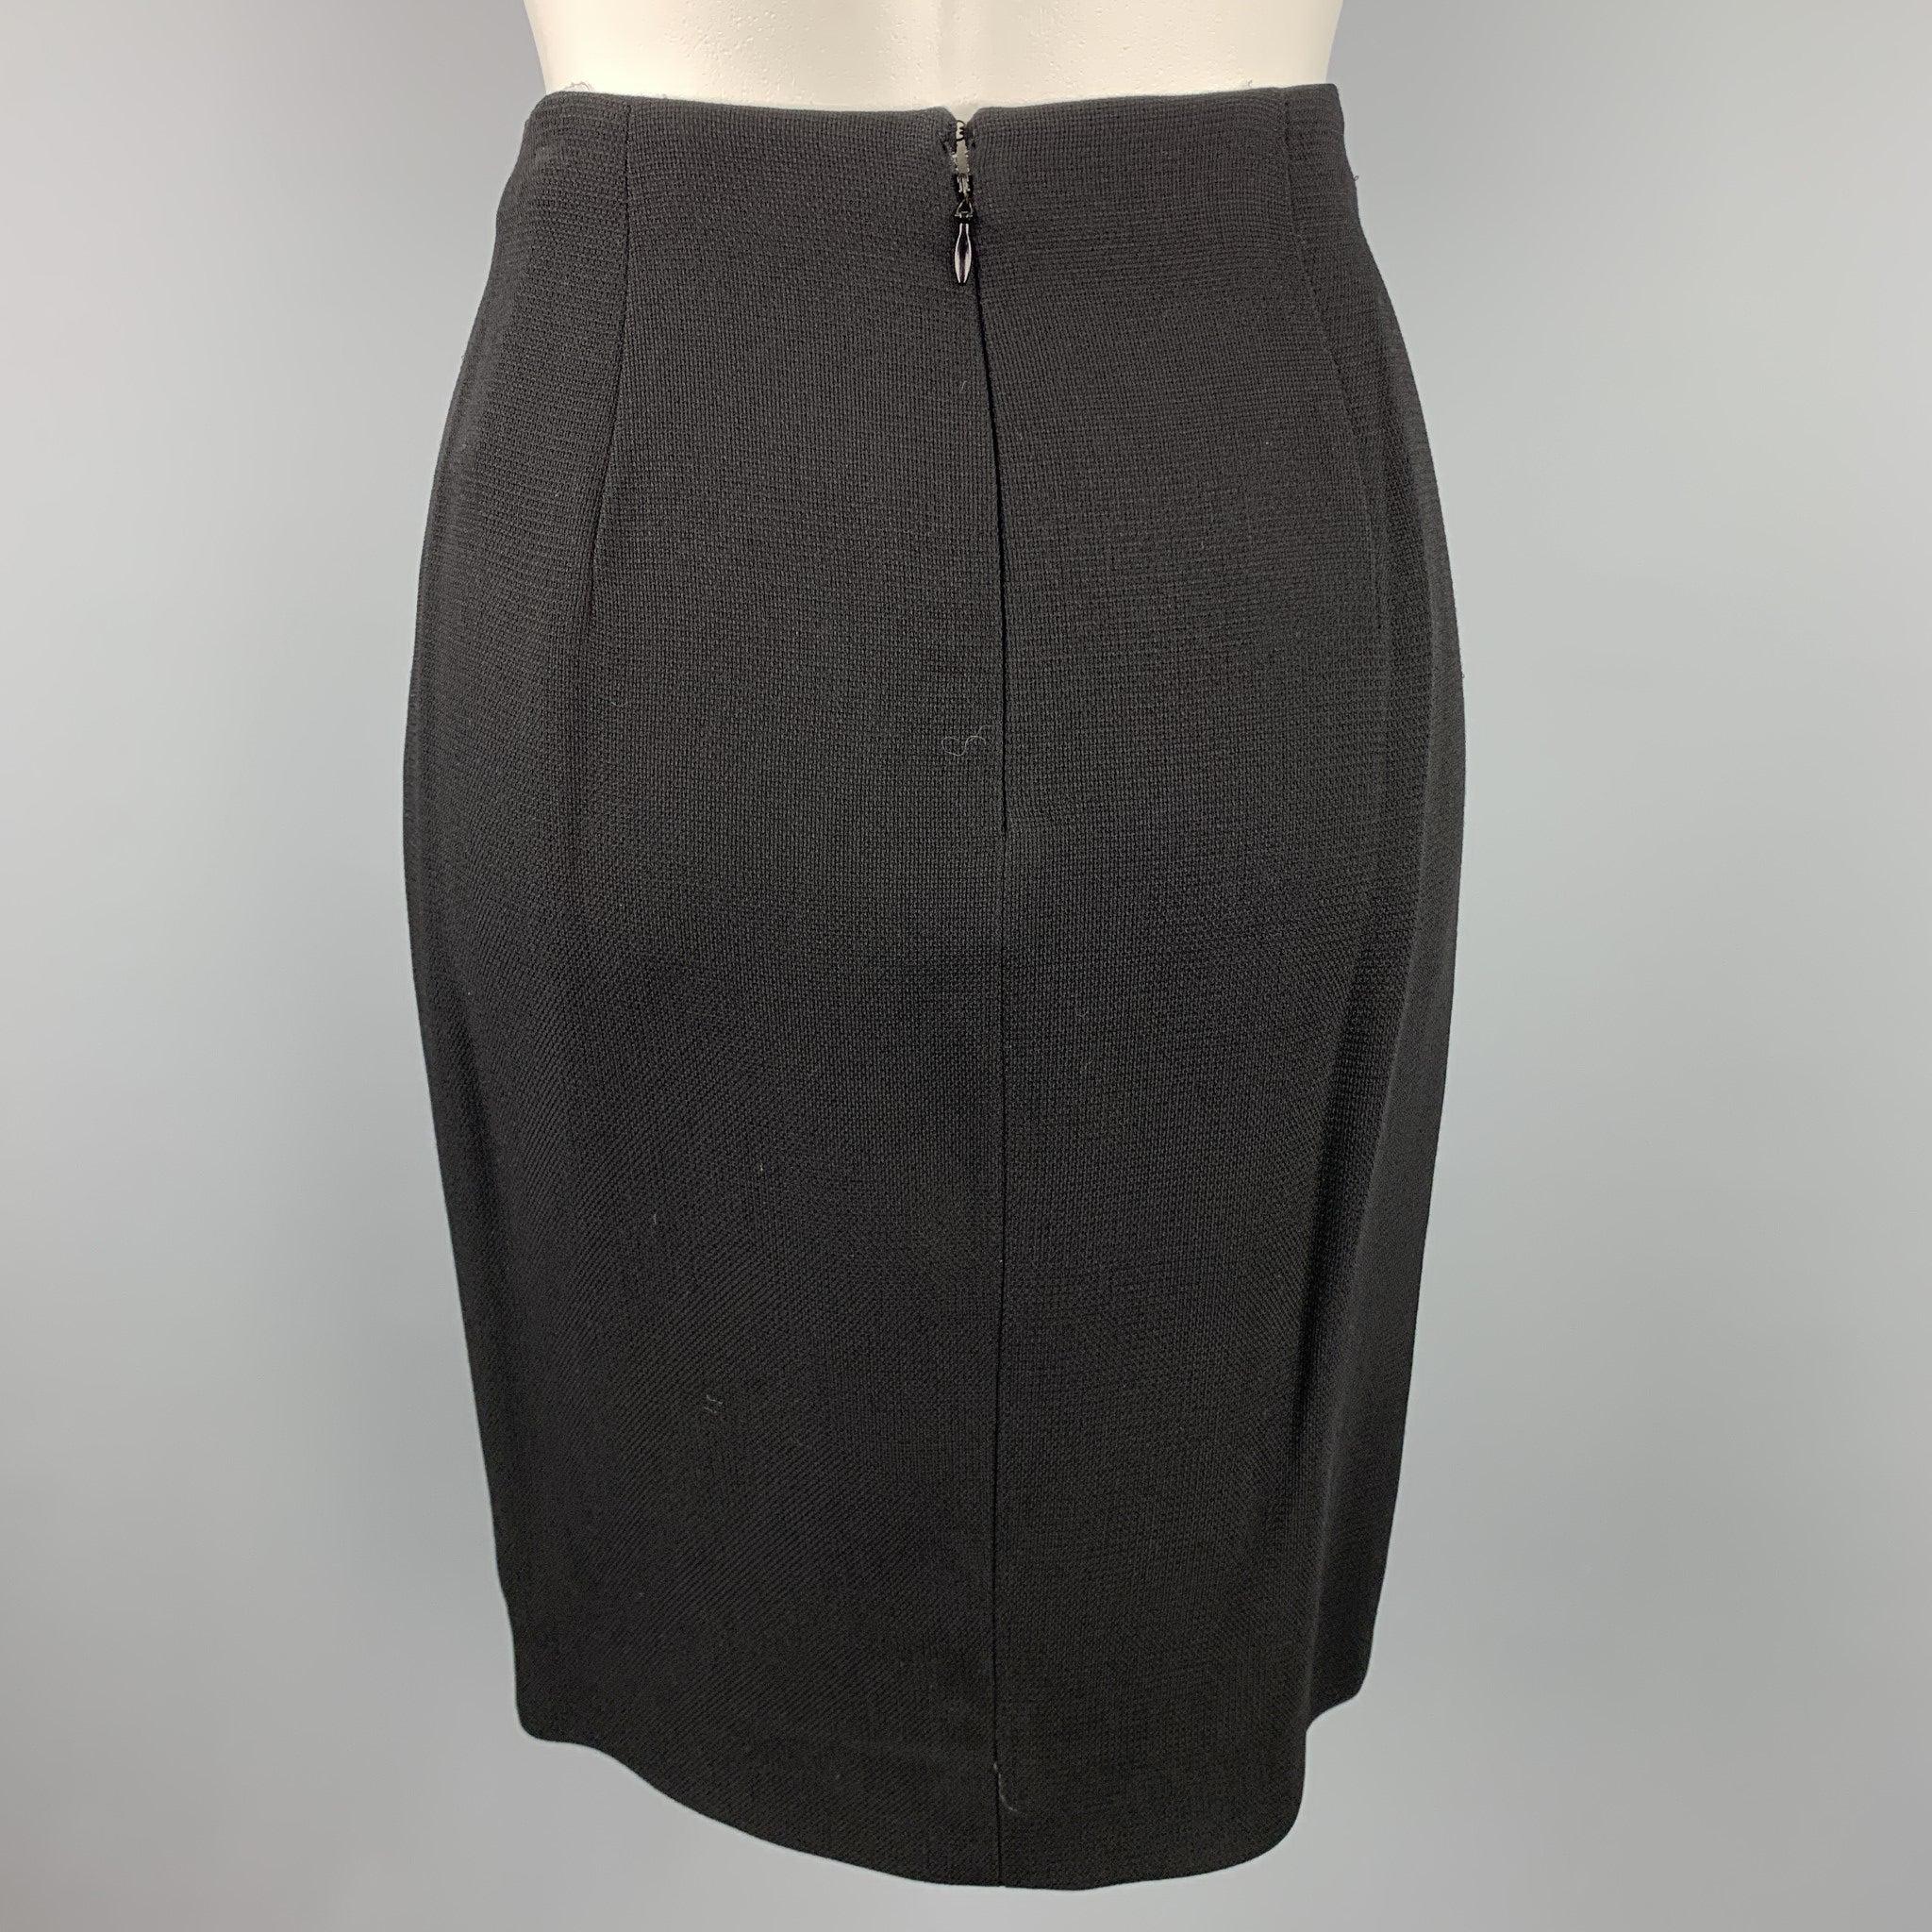 GIANNI VERSACE Size 8 Black Textured Pencil Skirt In Good Condition For Sale In San Francisco, CA